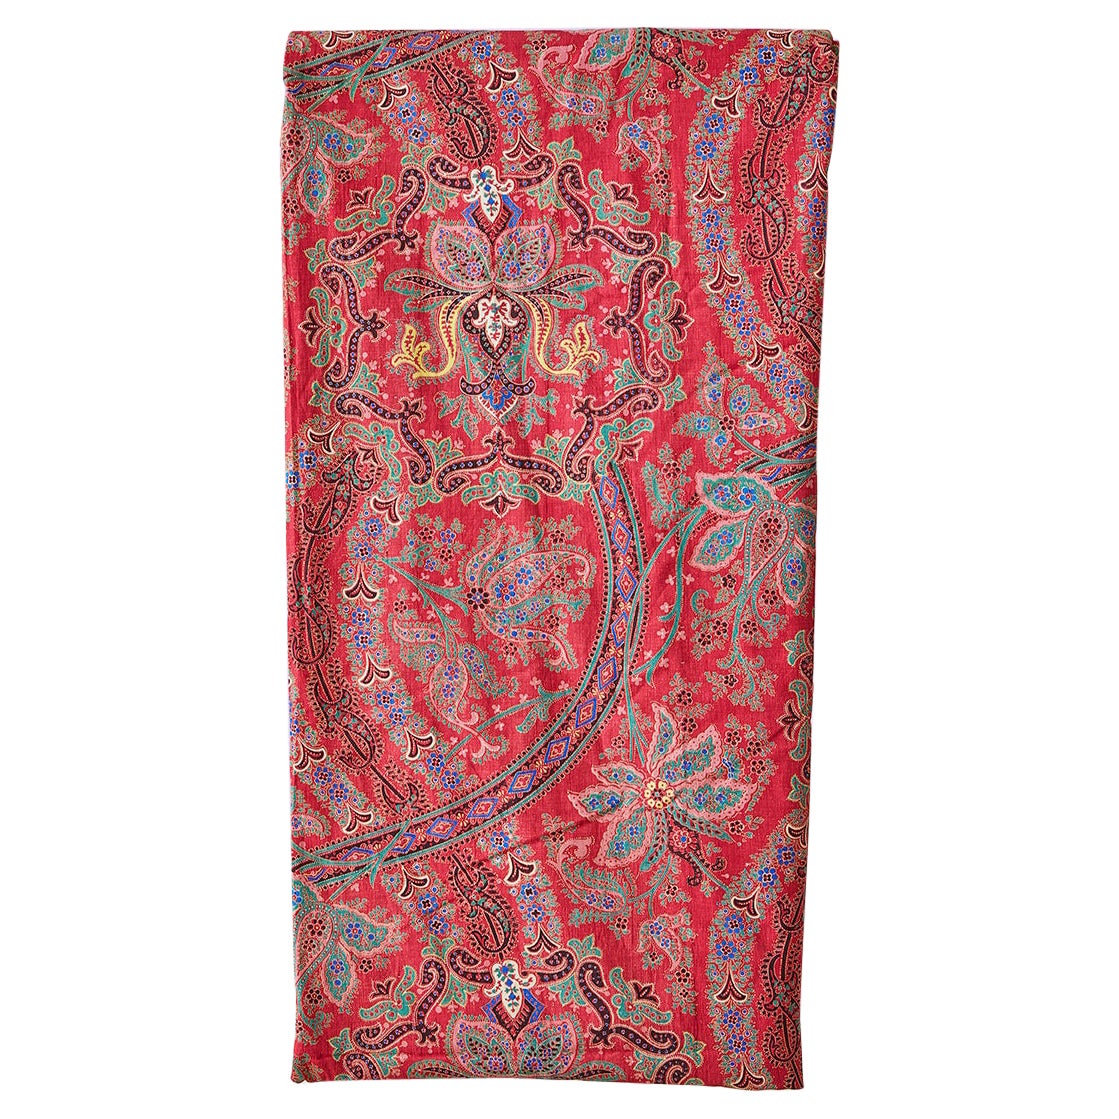 Large Antique Paisley Curtain Textile in Red with Pattern, France, 19th Century For Sale